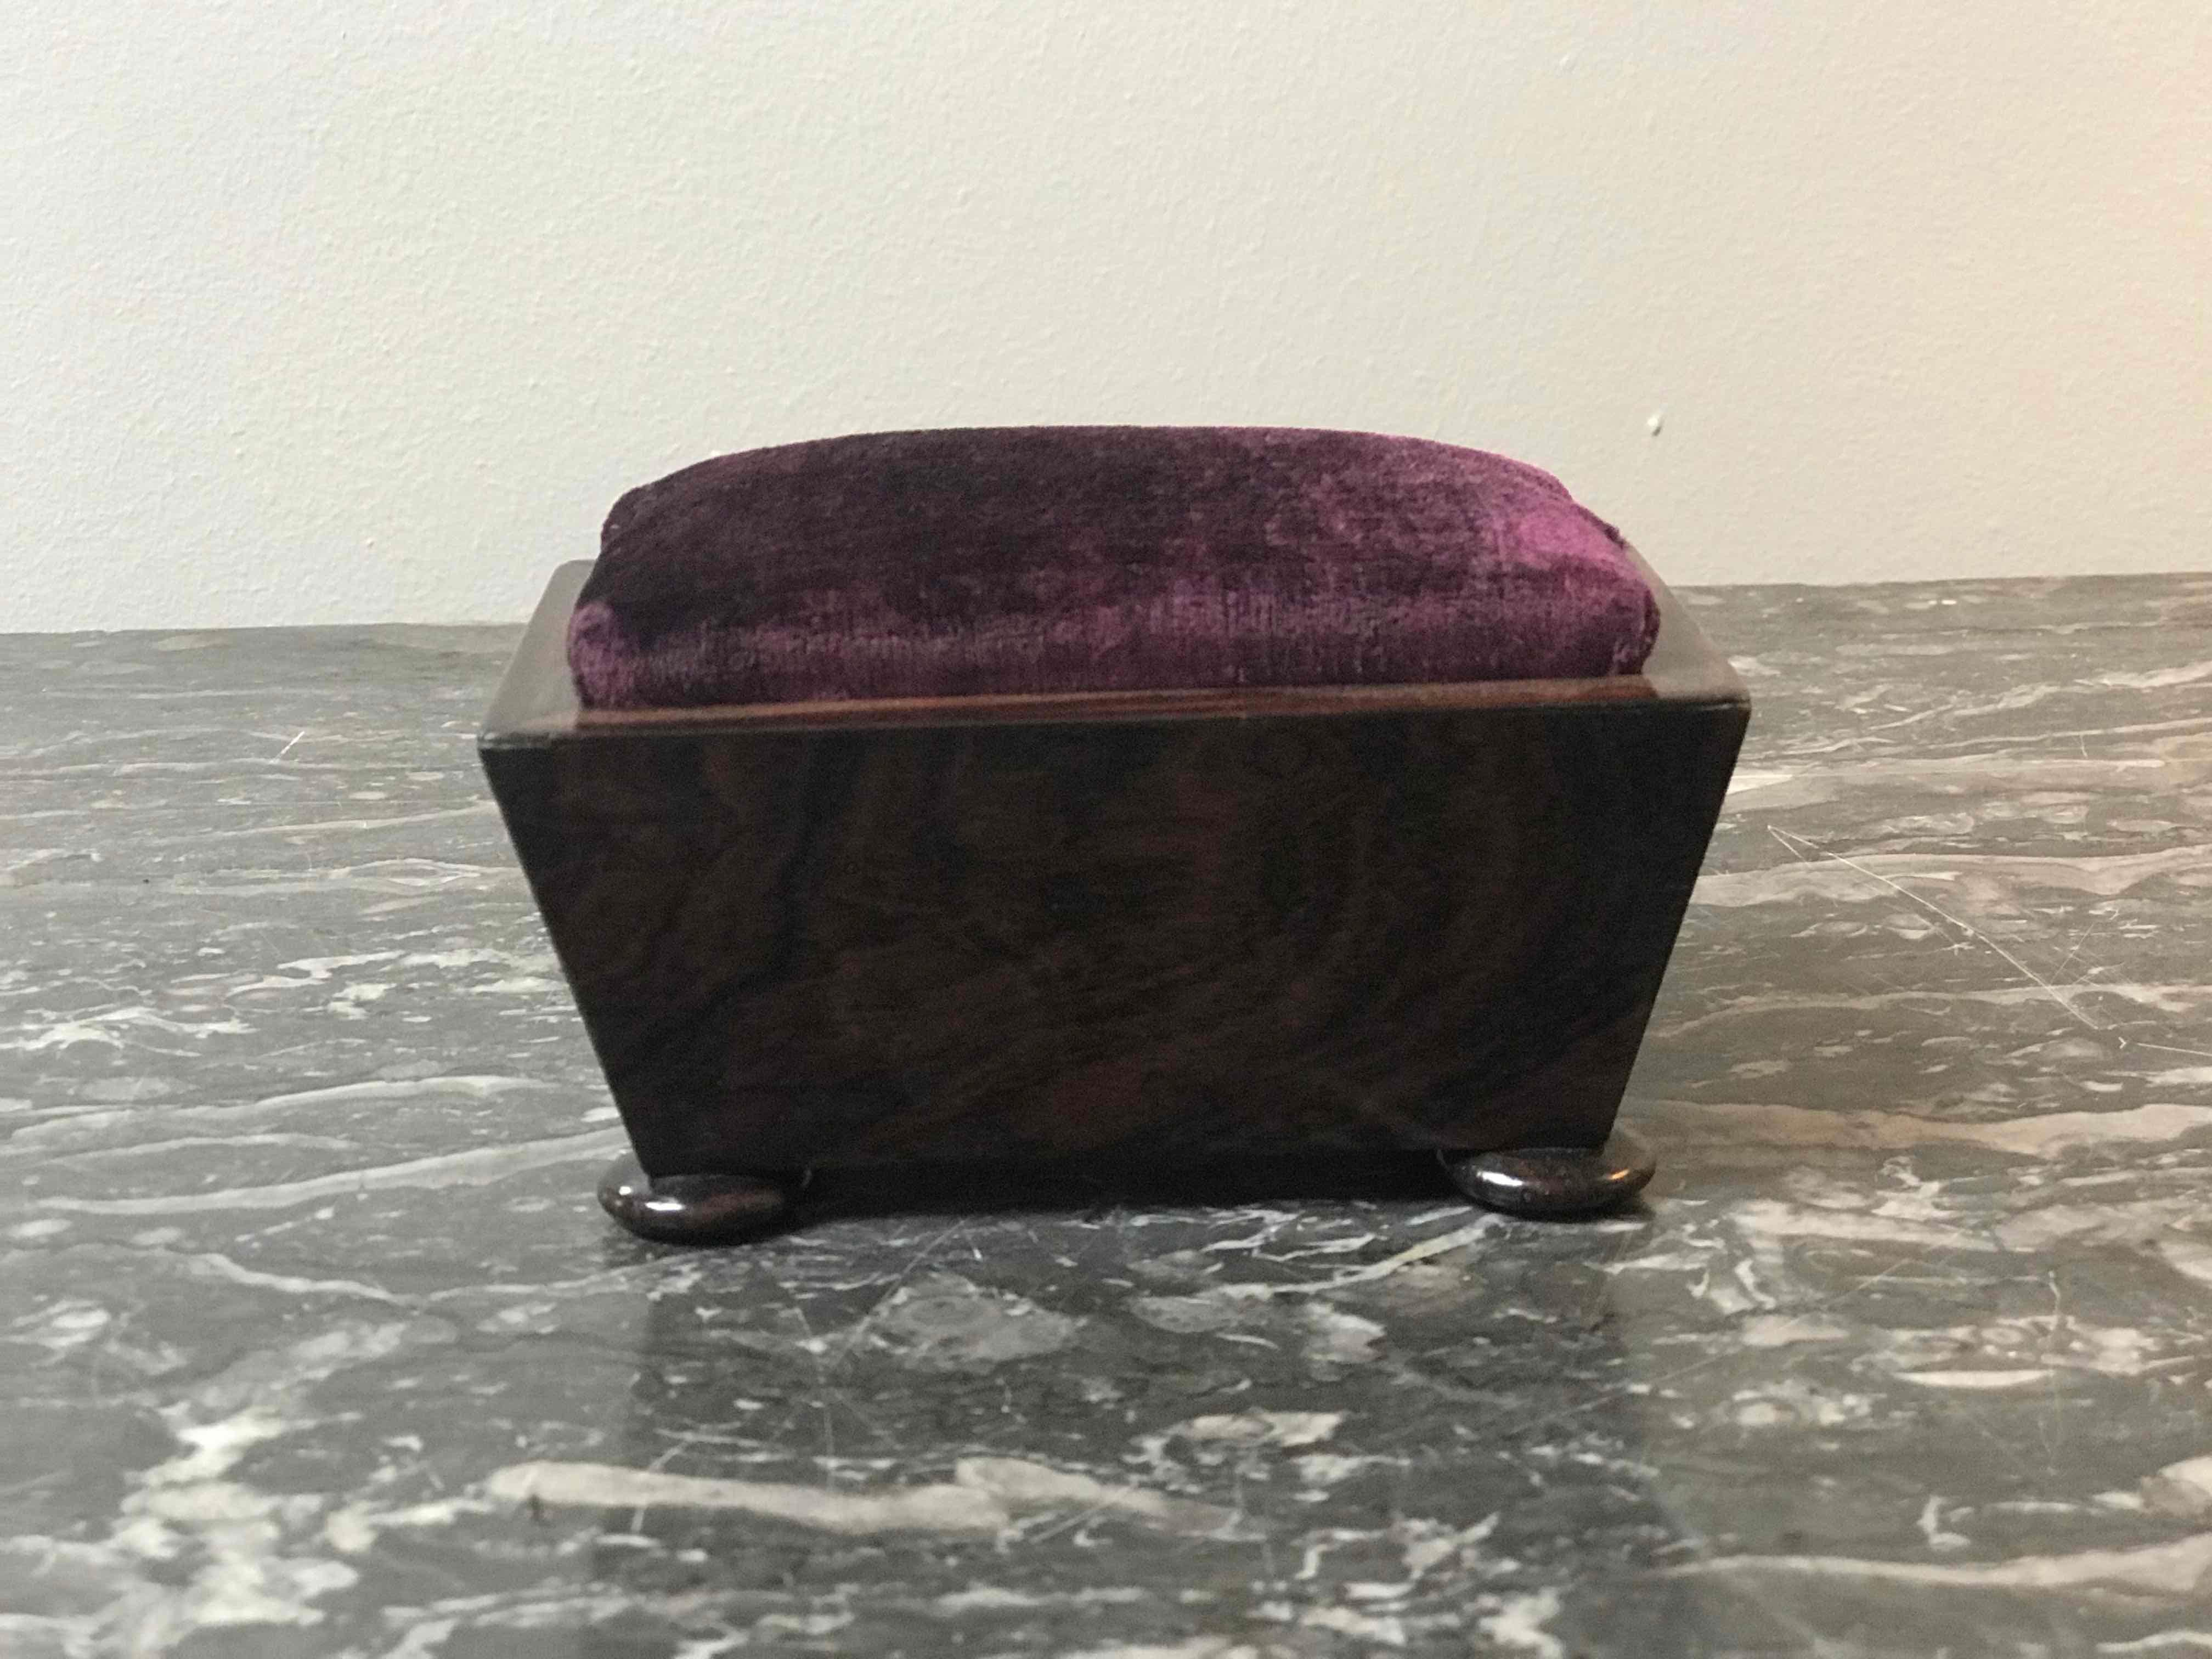 Victorian Wooden Pin Cushion Box with Round Feet from Late 19th Century England